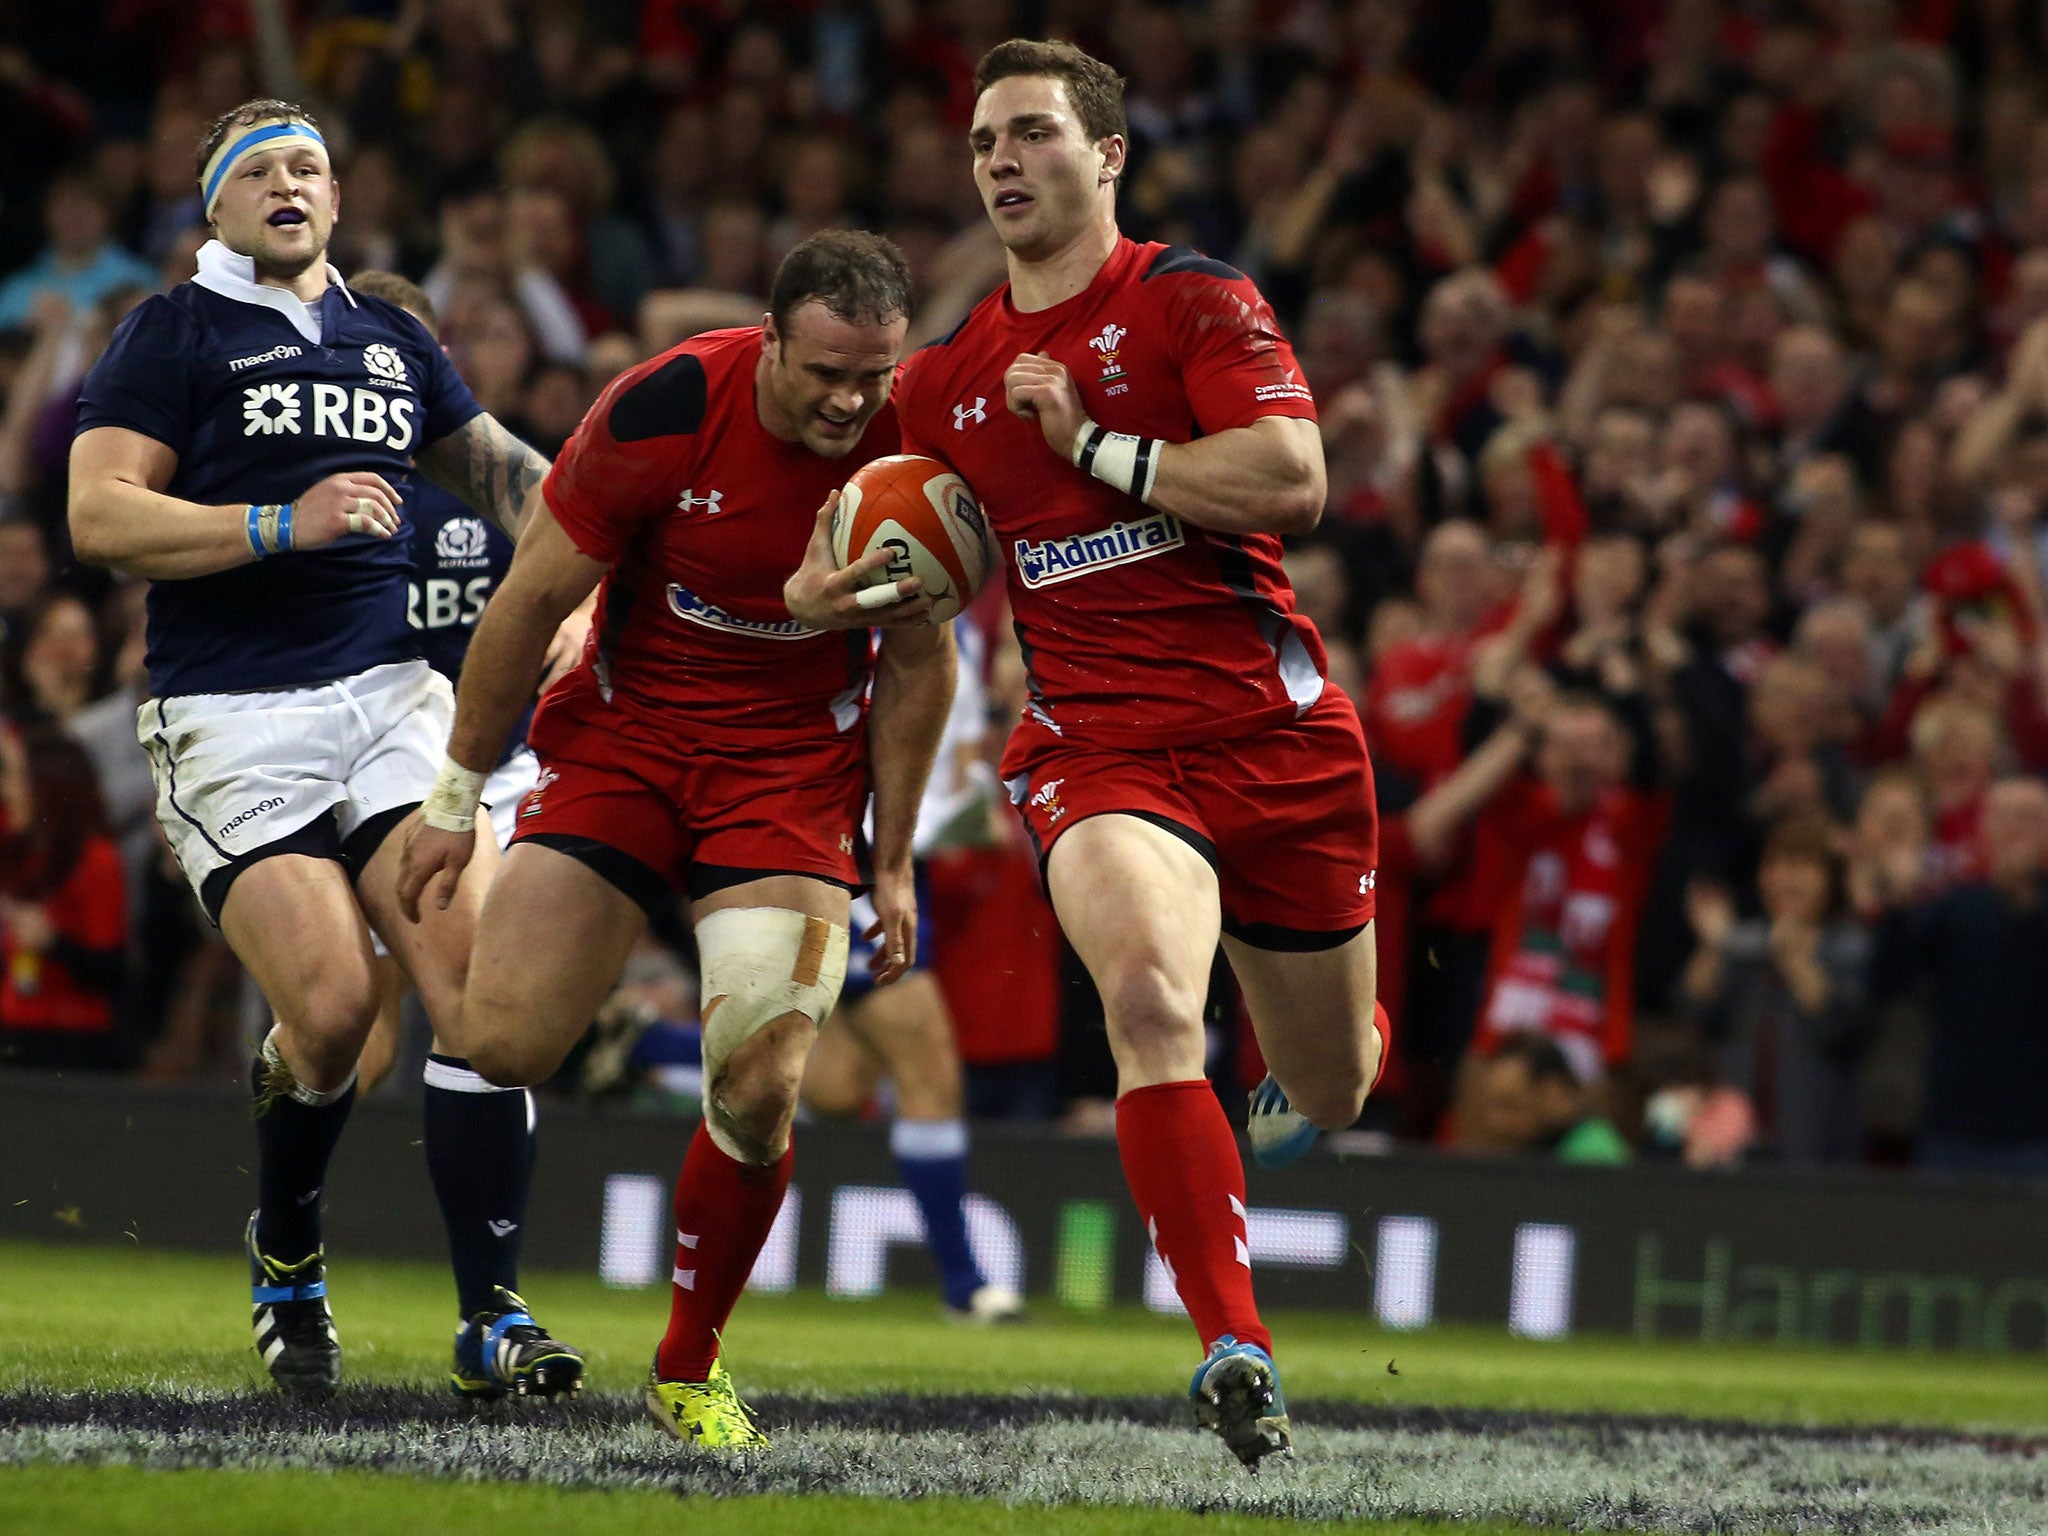 George North runs in a try during Wales’ win over Scotland